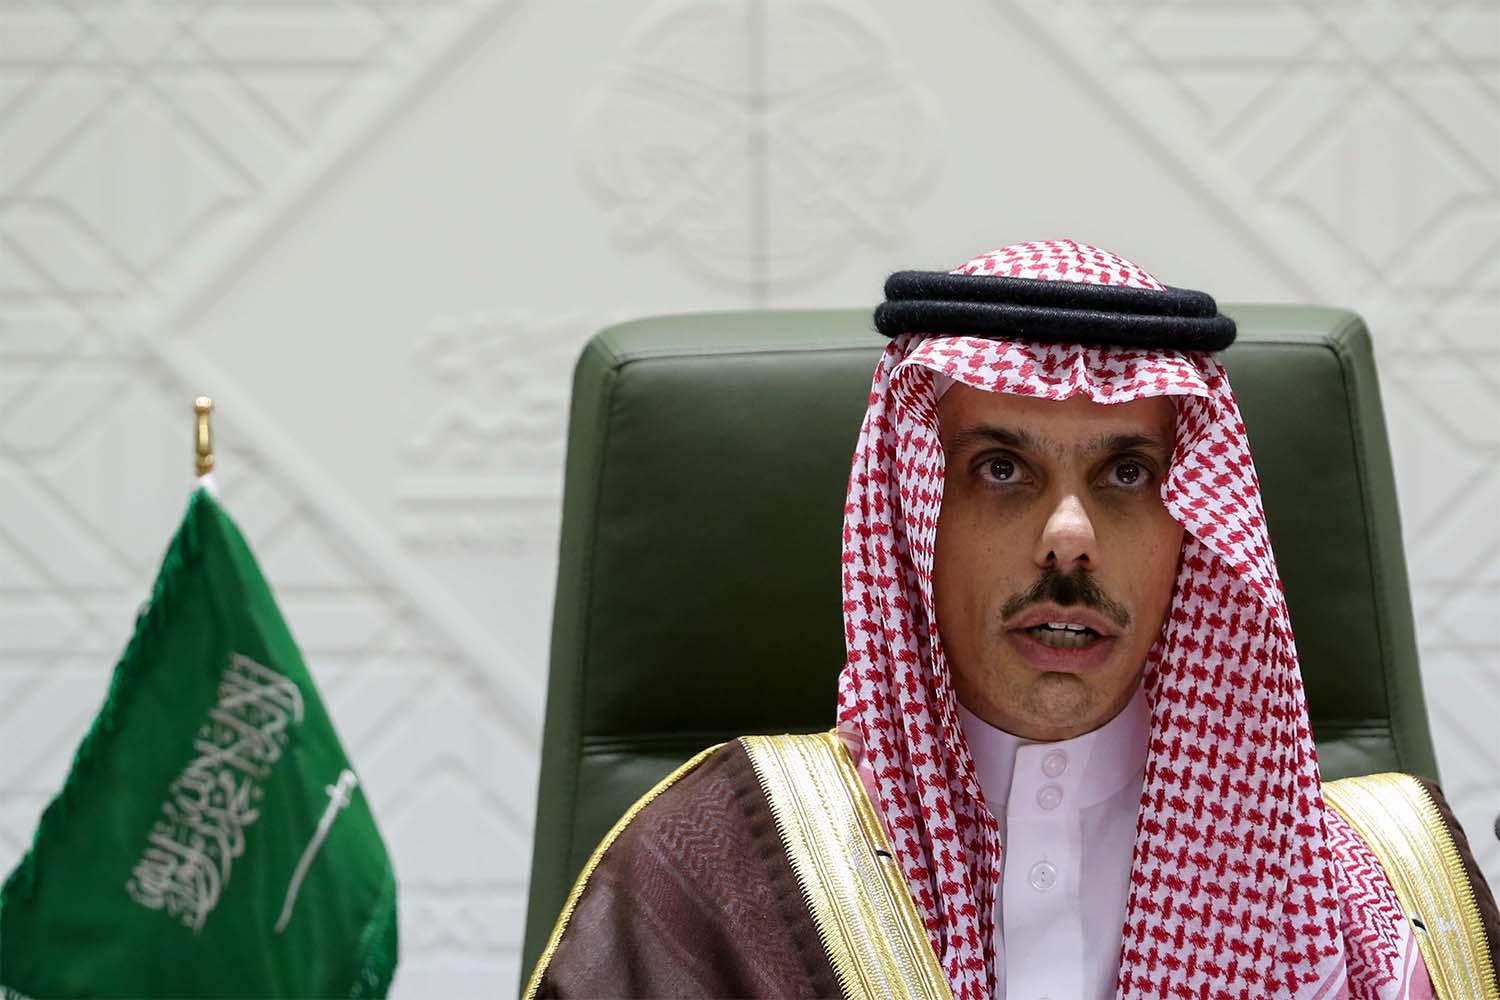 A unilaterally declared Saudi ceasefire collapsed last year